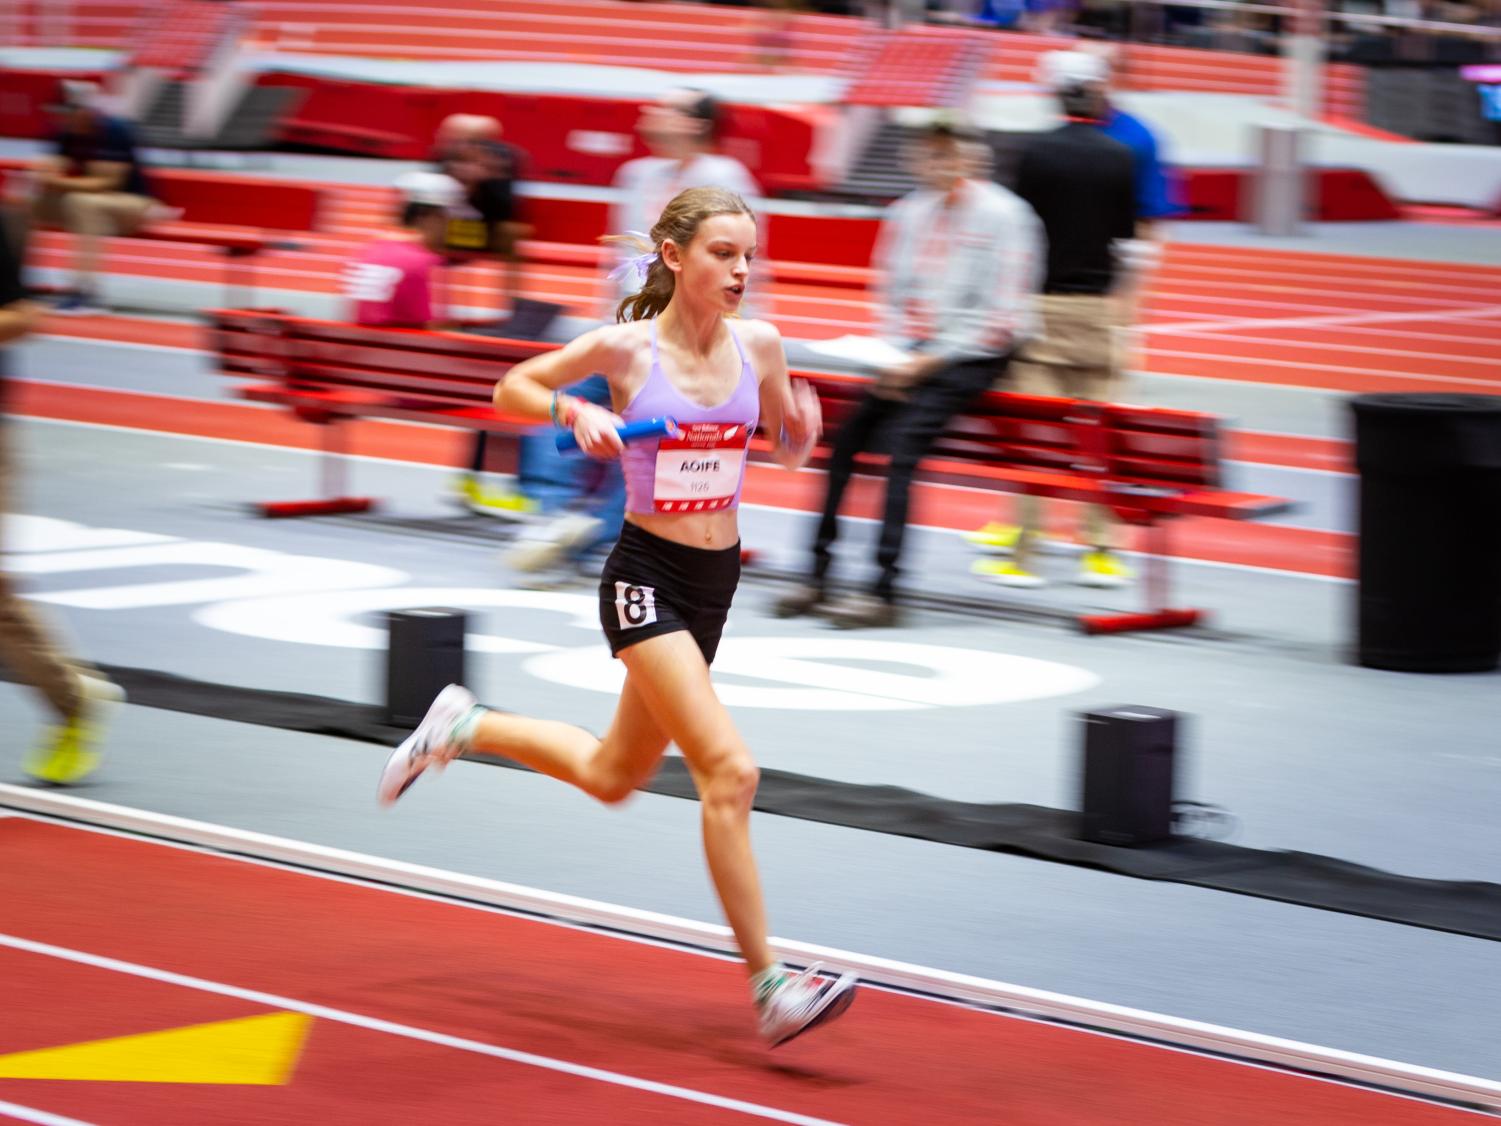 Pictured: Aoife Shovlin ’25 competing at New Balance Indoor Nationals last month.